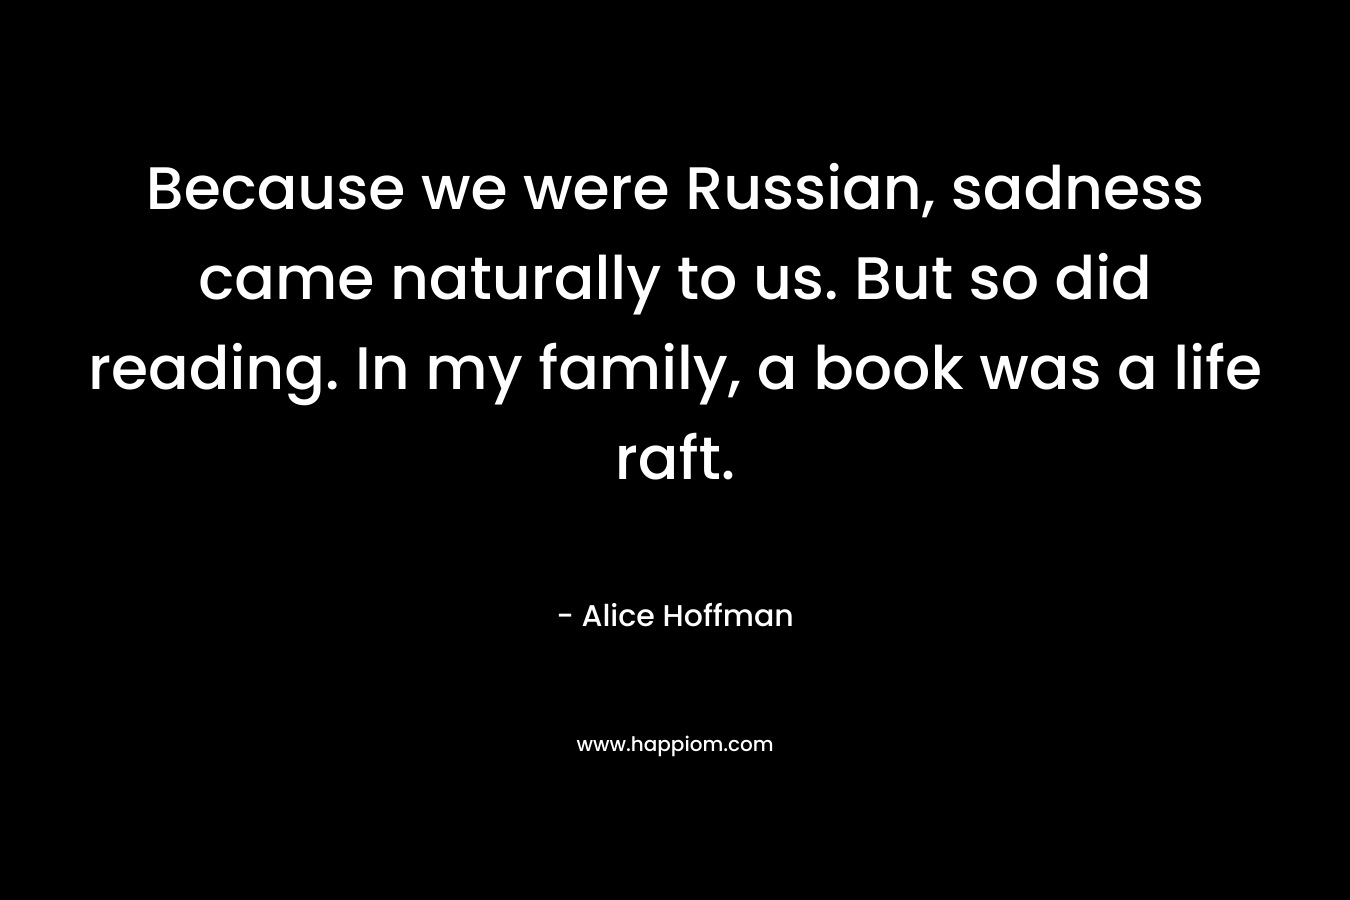 Because we were Russian, sadness came naturally to us. But so did reading. In my family, a book was a life raft.